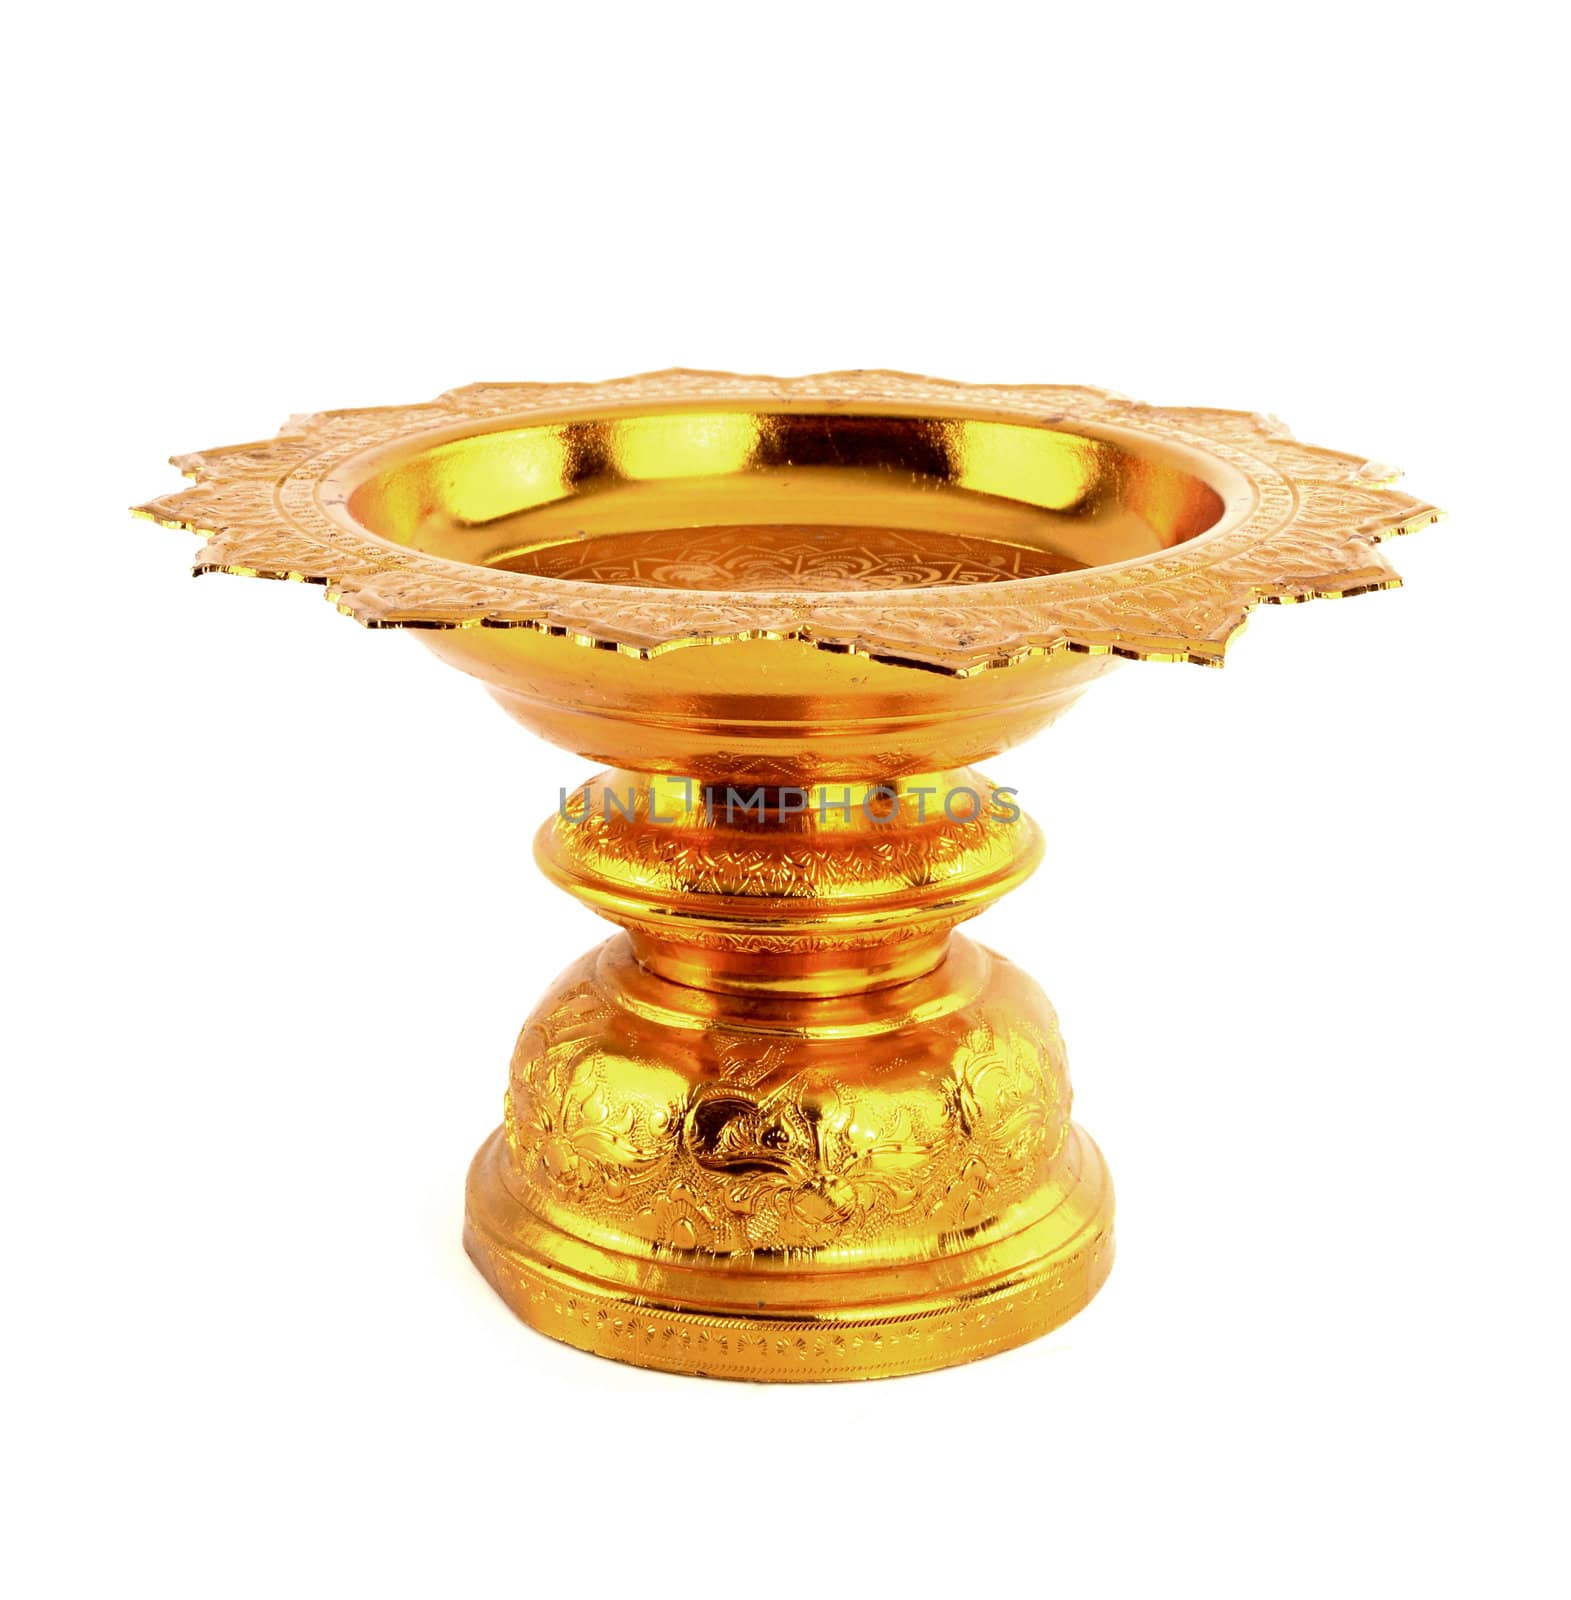 golden tray with pedestal upside down in isolated white background